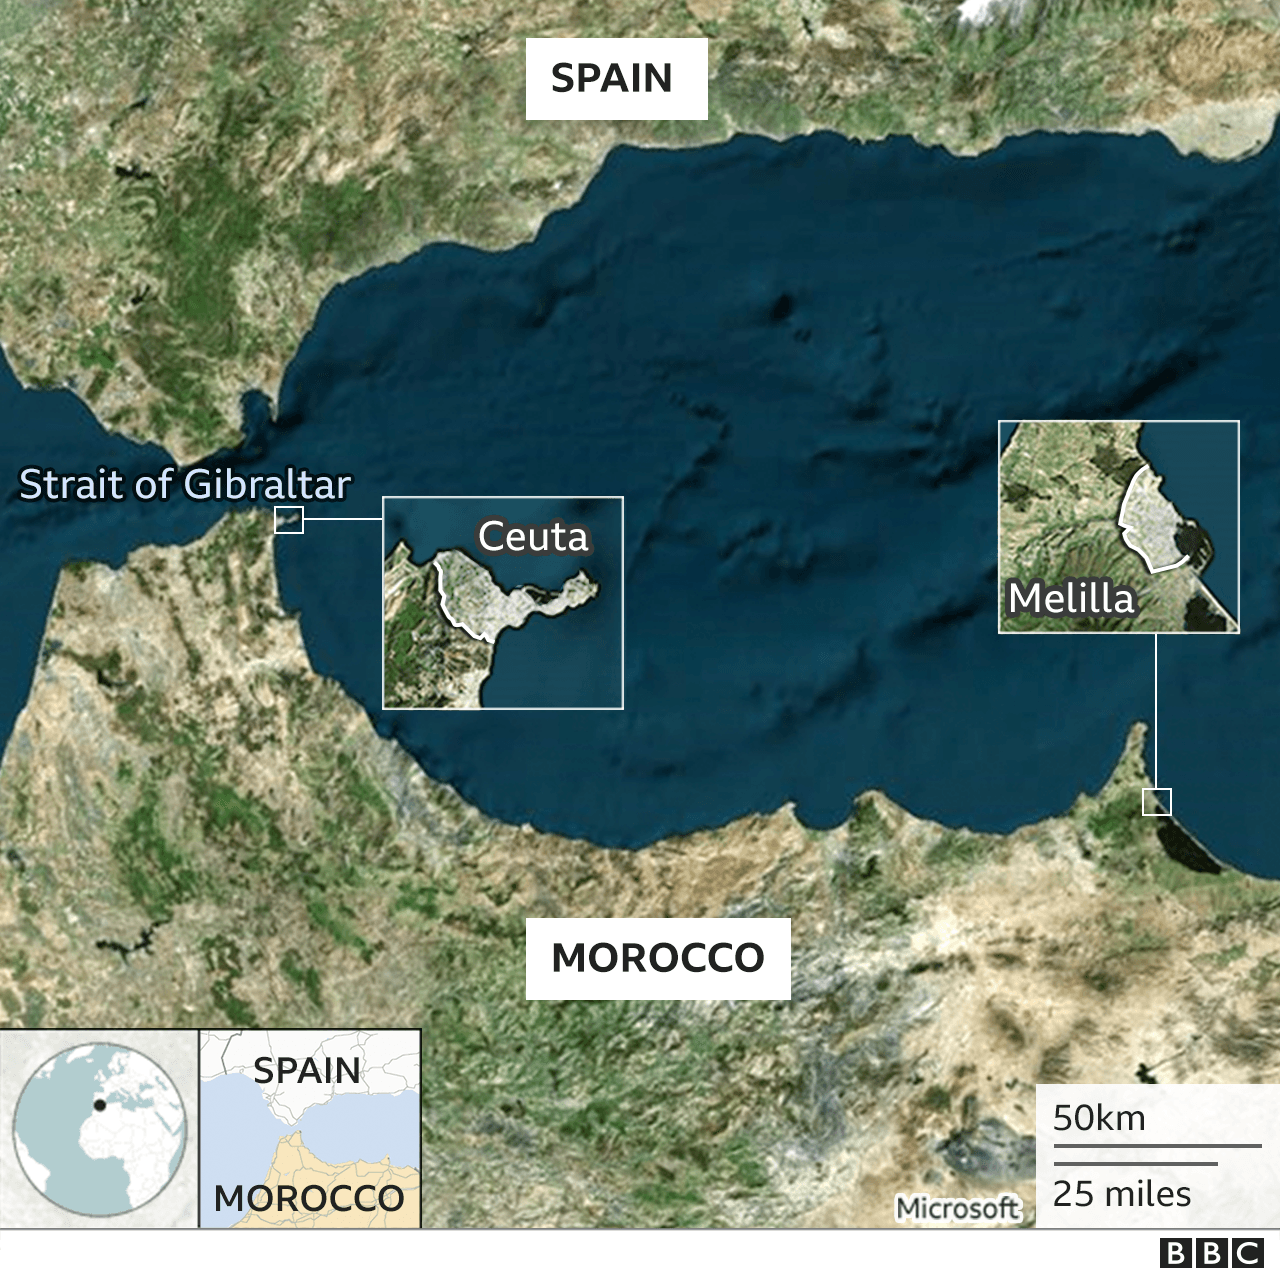 Map of Spain and Morocco showing locations of Ceuta and Melilla